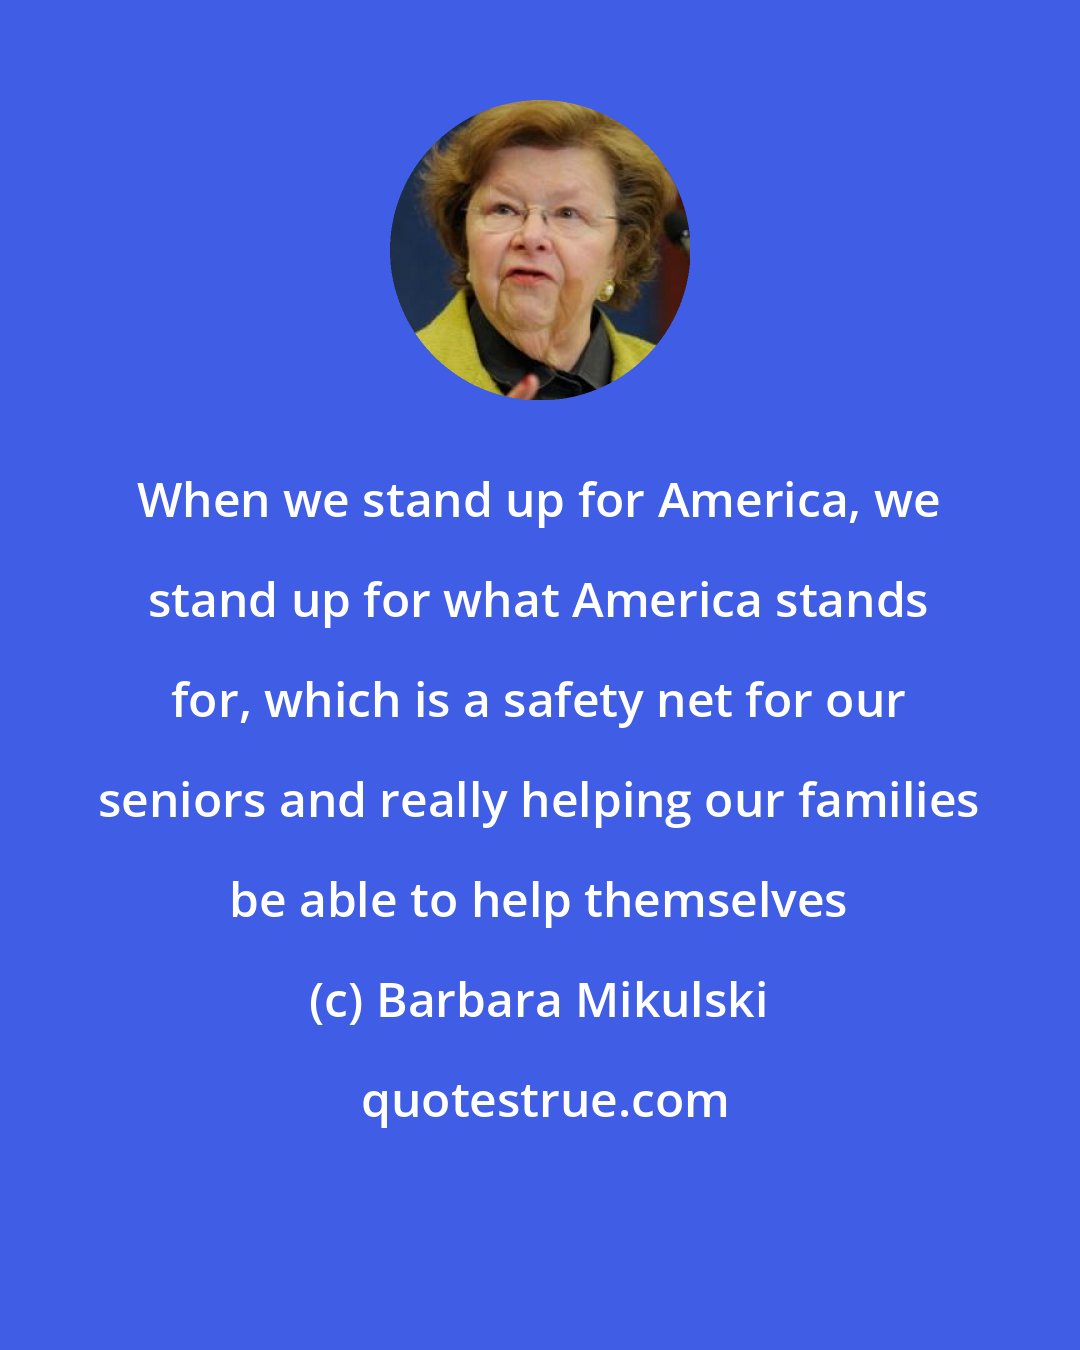 Barbara Mikulski: When we stand up for America, we stand up for what America stands for, which is a safety net for our seniors and really helping our families be able to help themselves